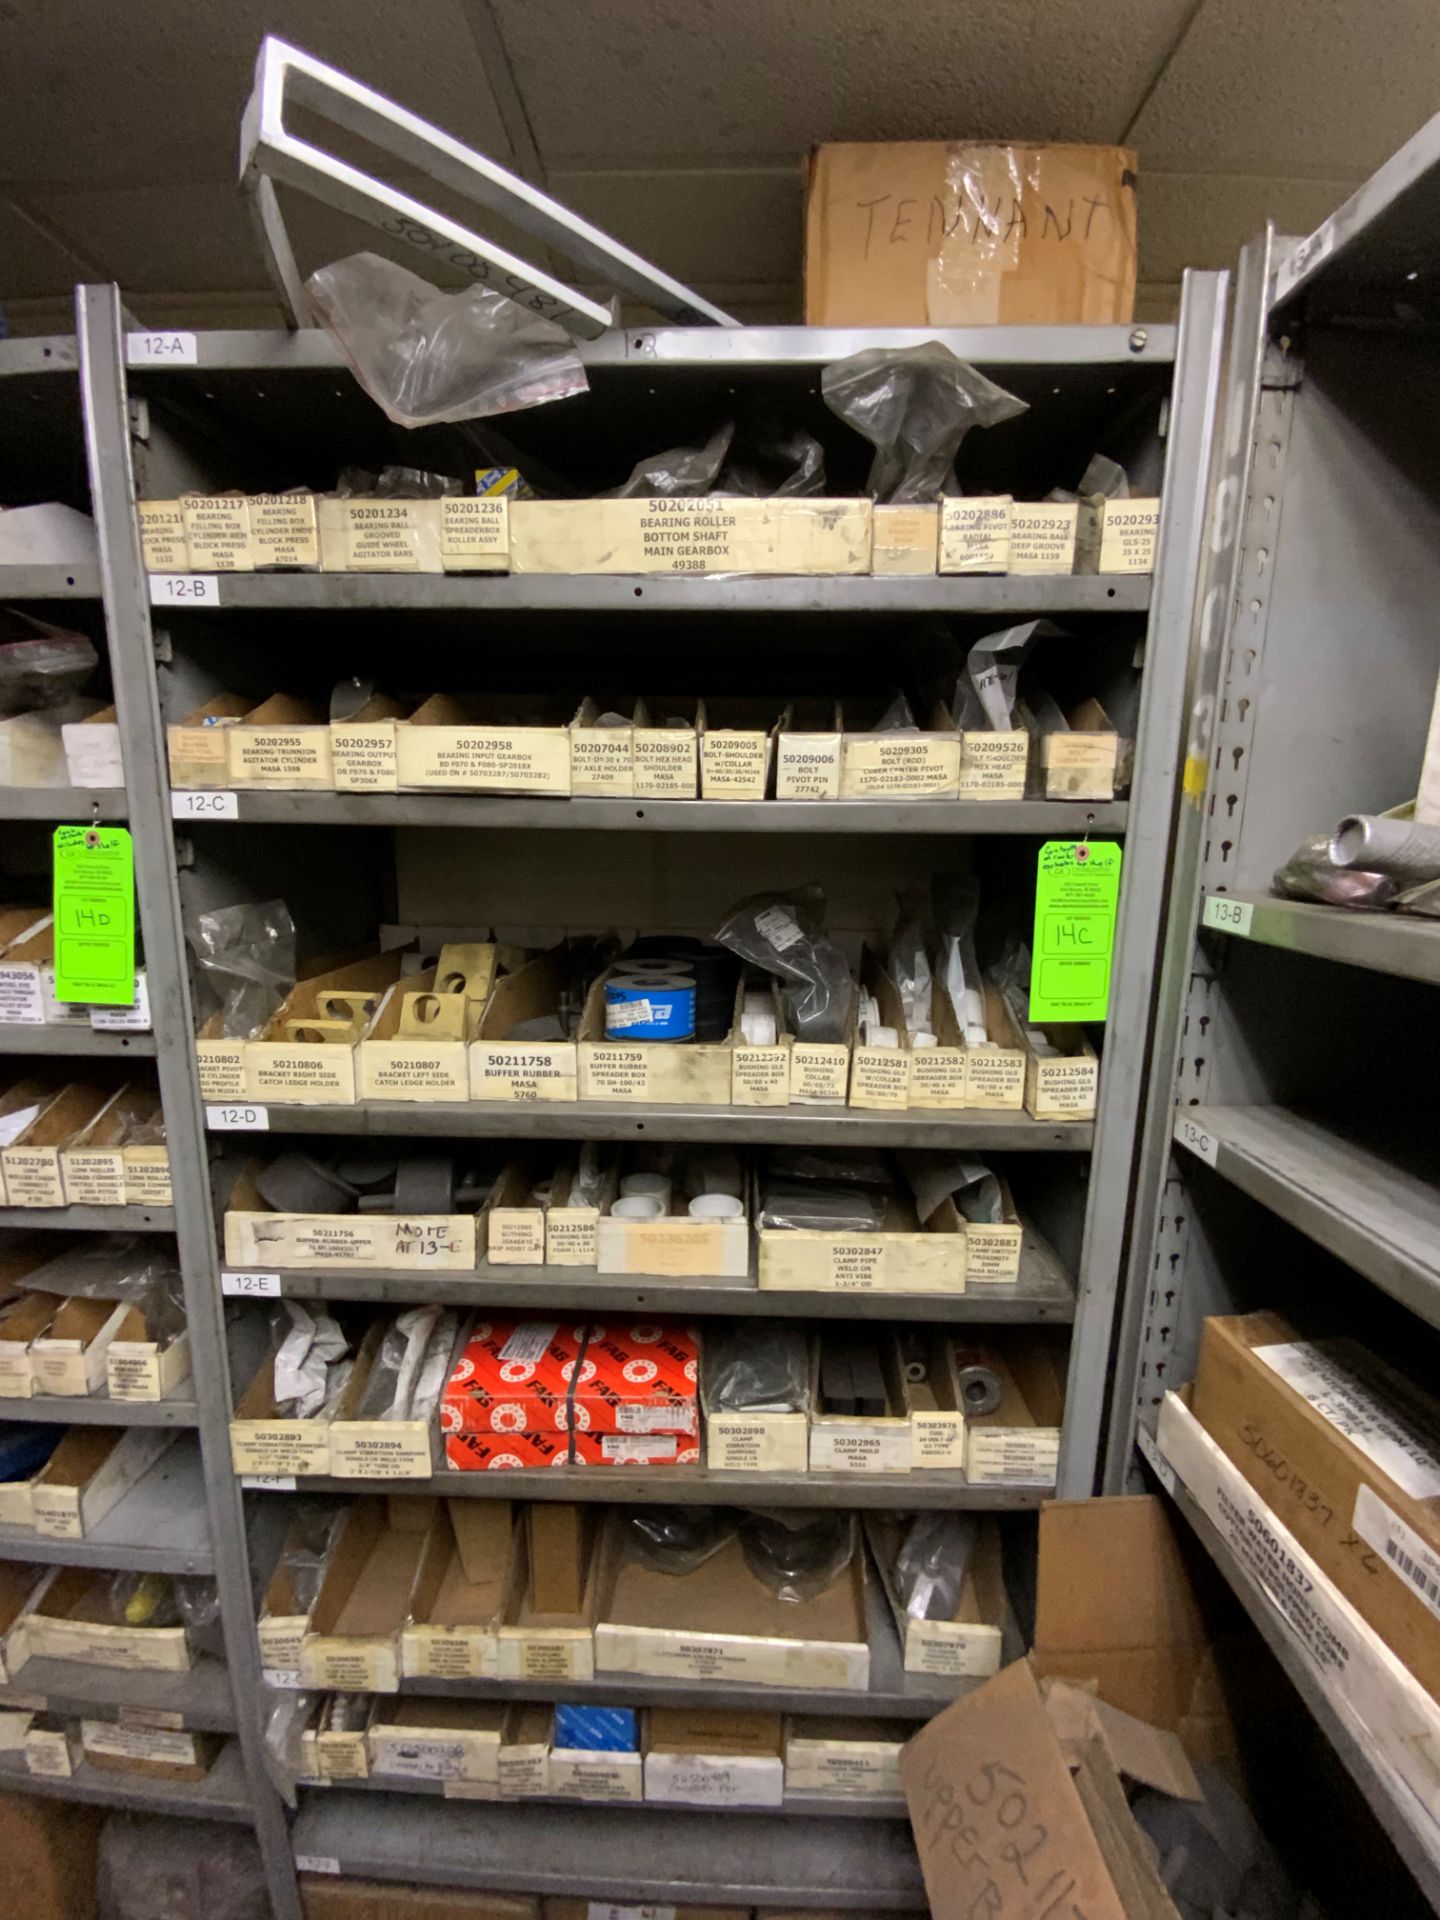 CONTENTS OF RACK (EXCLUDING TOP SHELF): MASA SPARE BEARINGS; BUSHINGS; GEARBOXES; ETC. - SEE